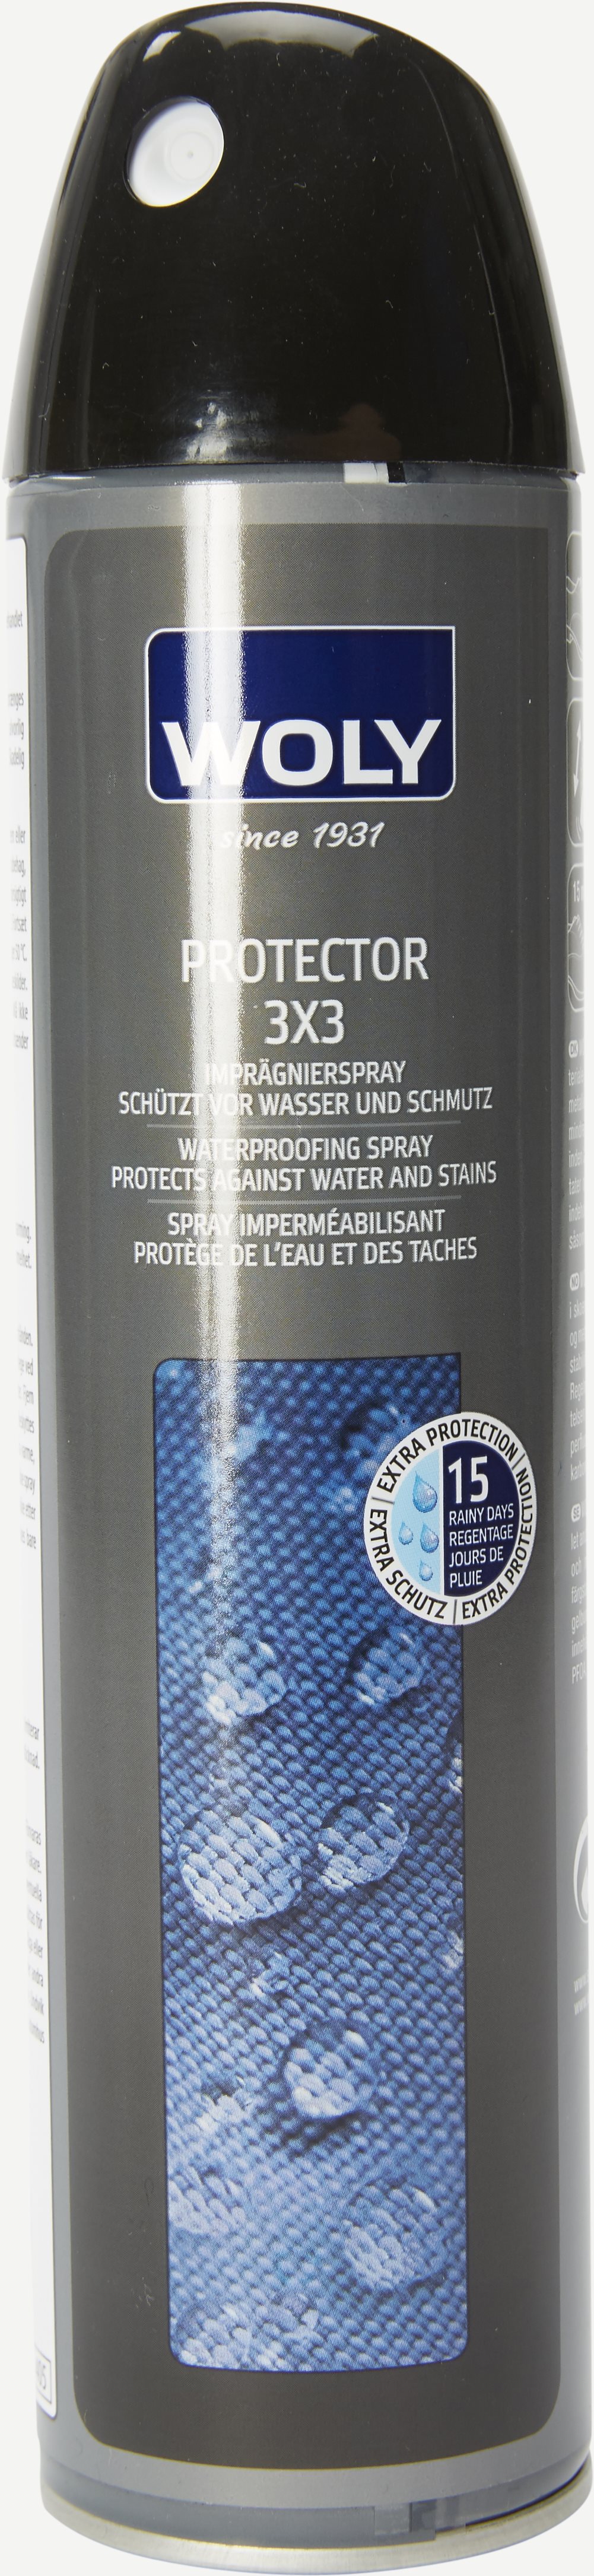 Woly Protector 3X3 Impregnering - Accessoarer - Grå